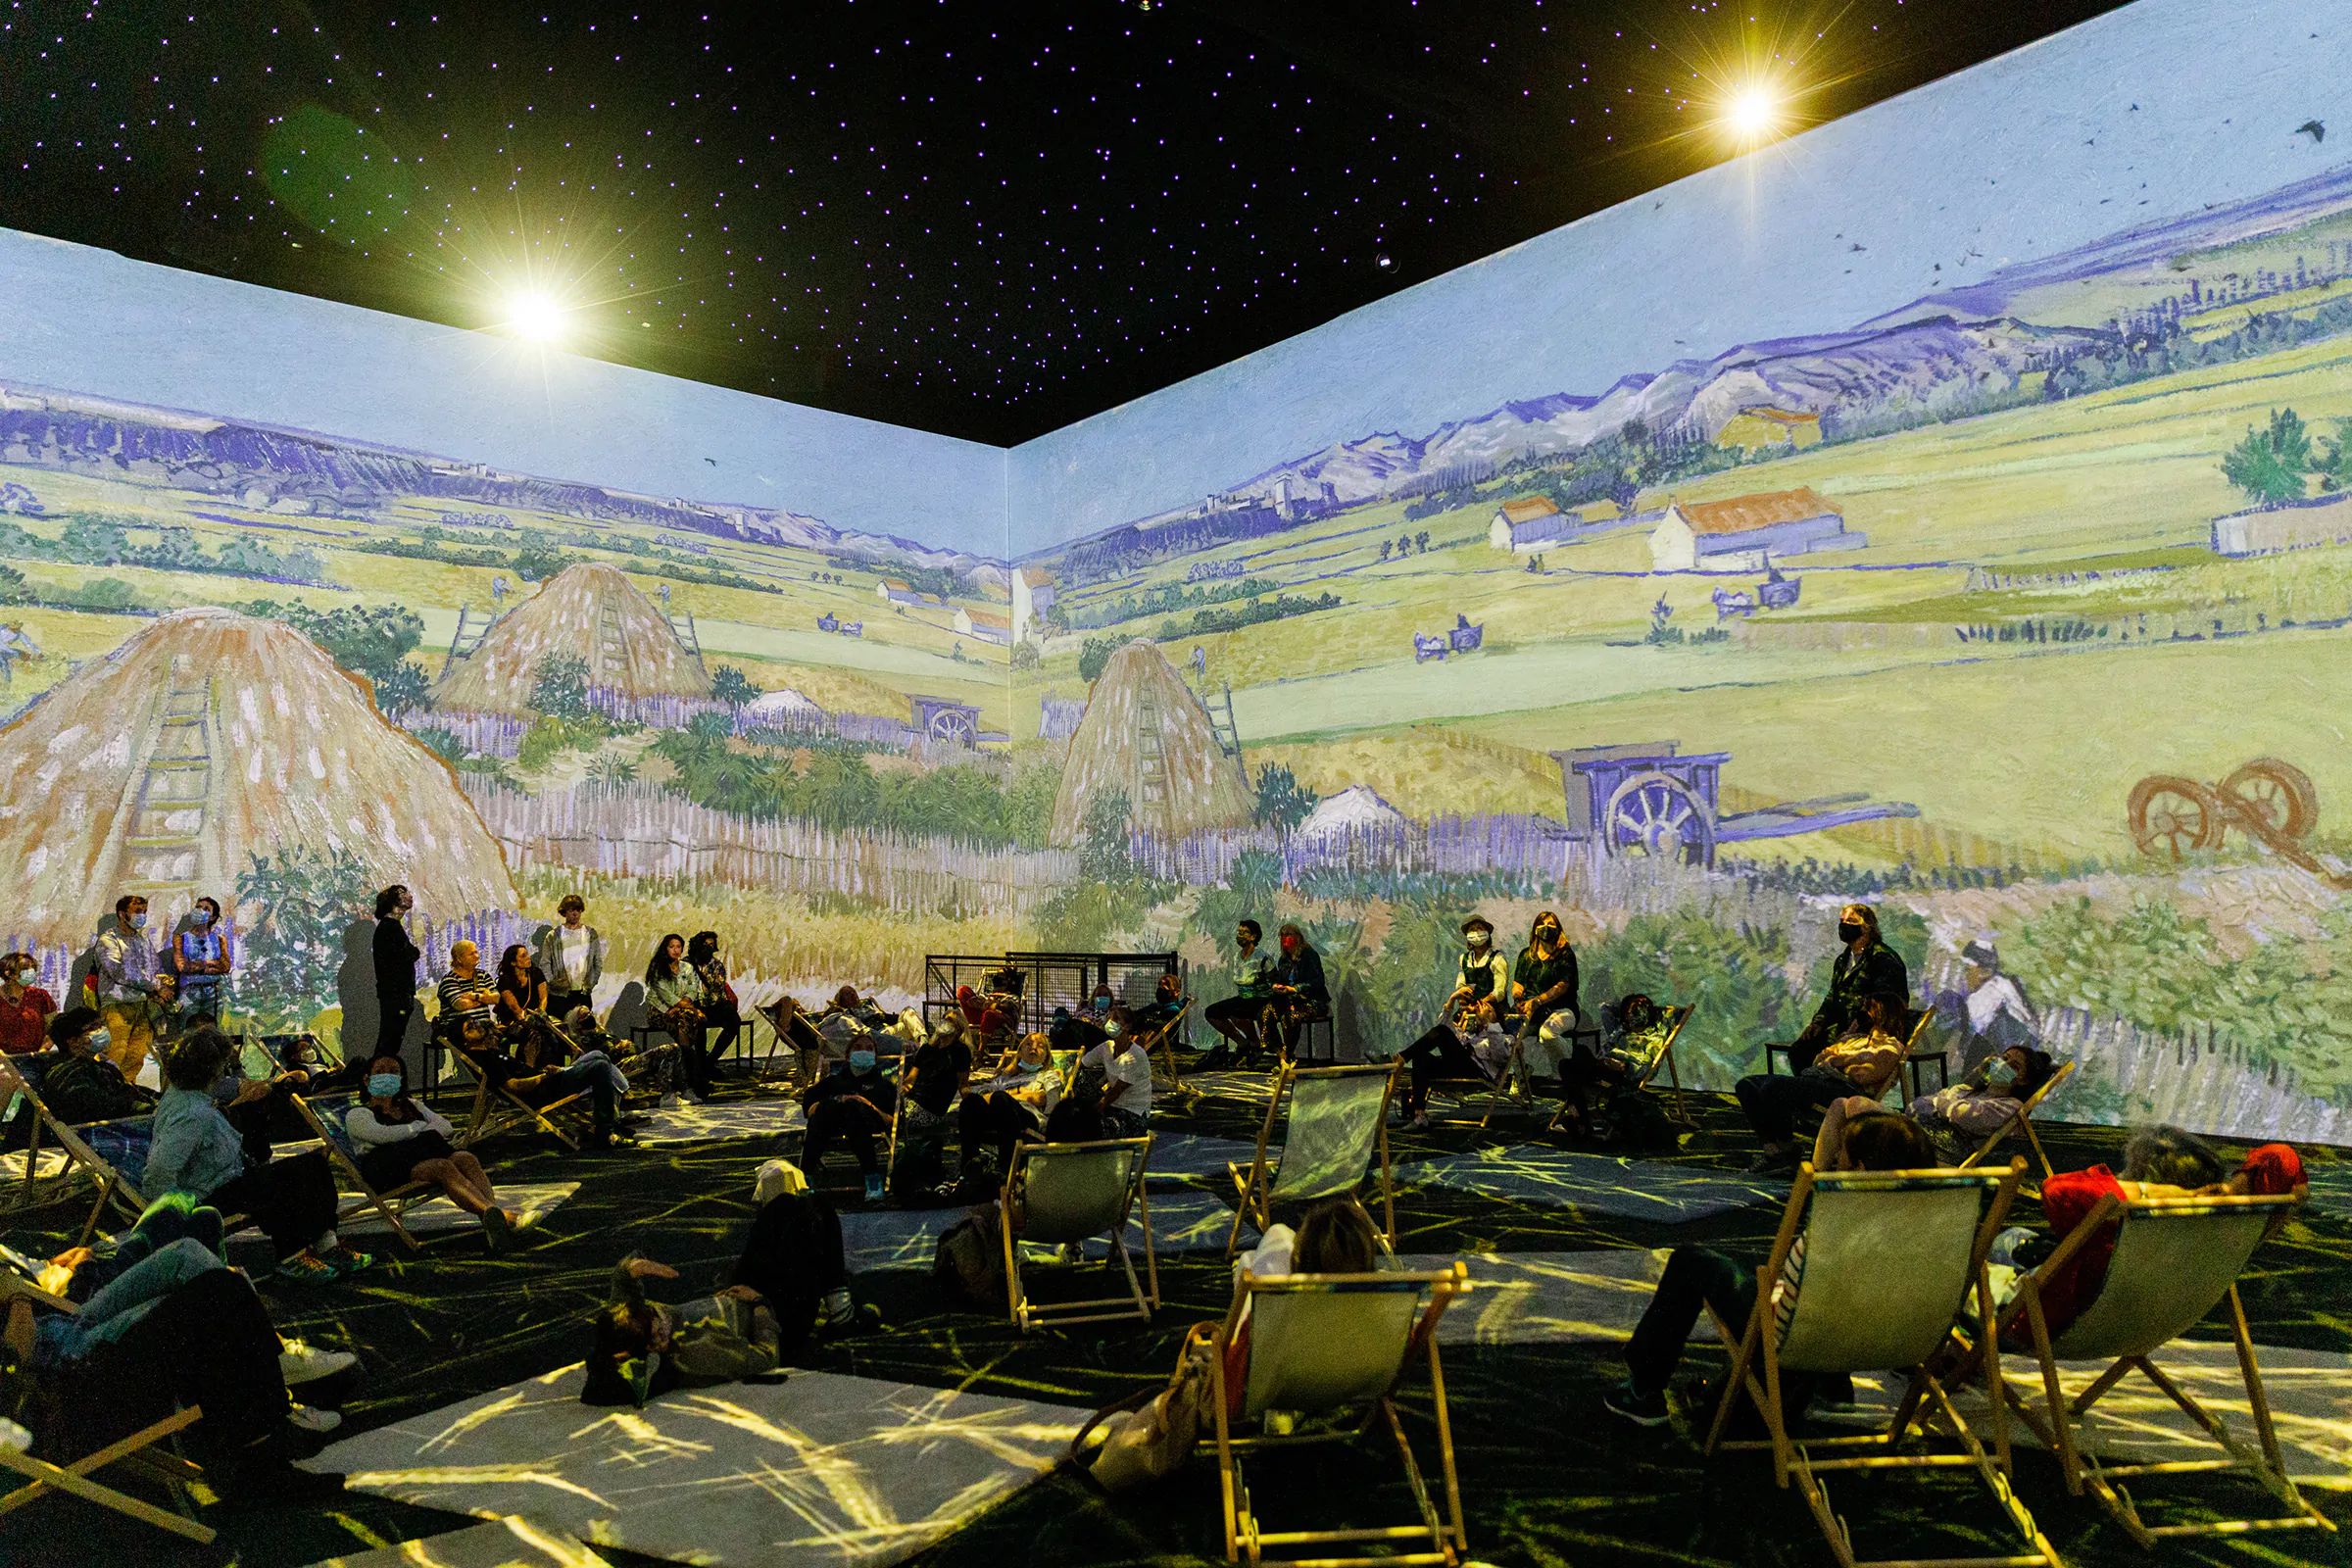 REVIEW: Van Gogh: The Immersive Experience, London